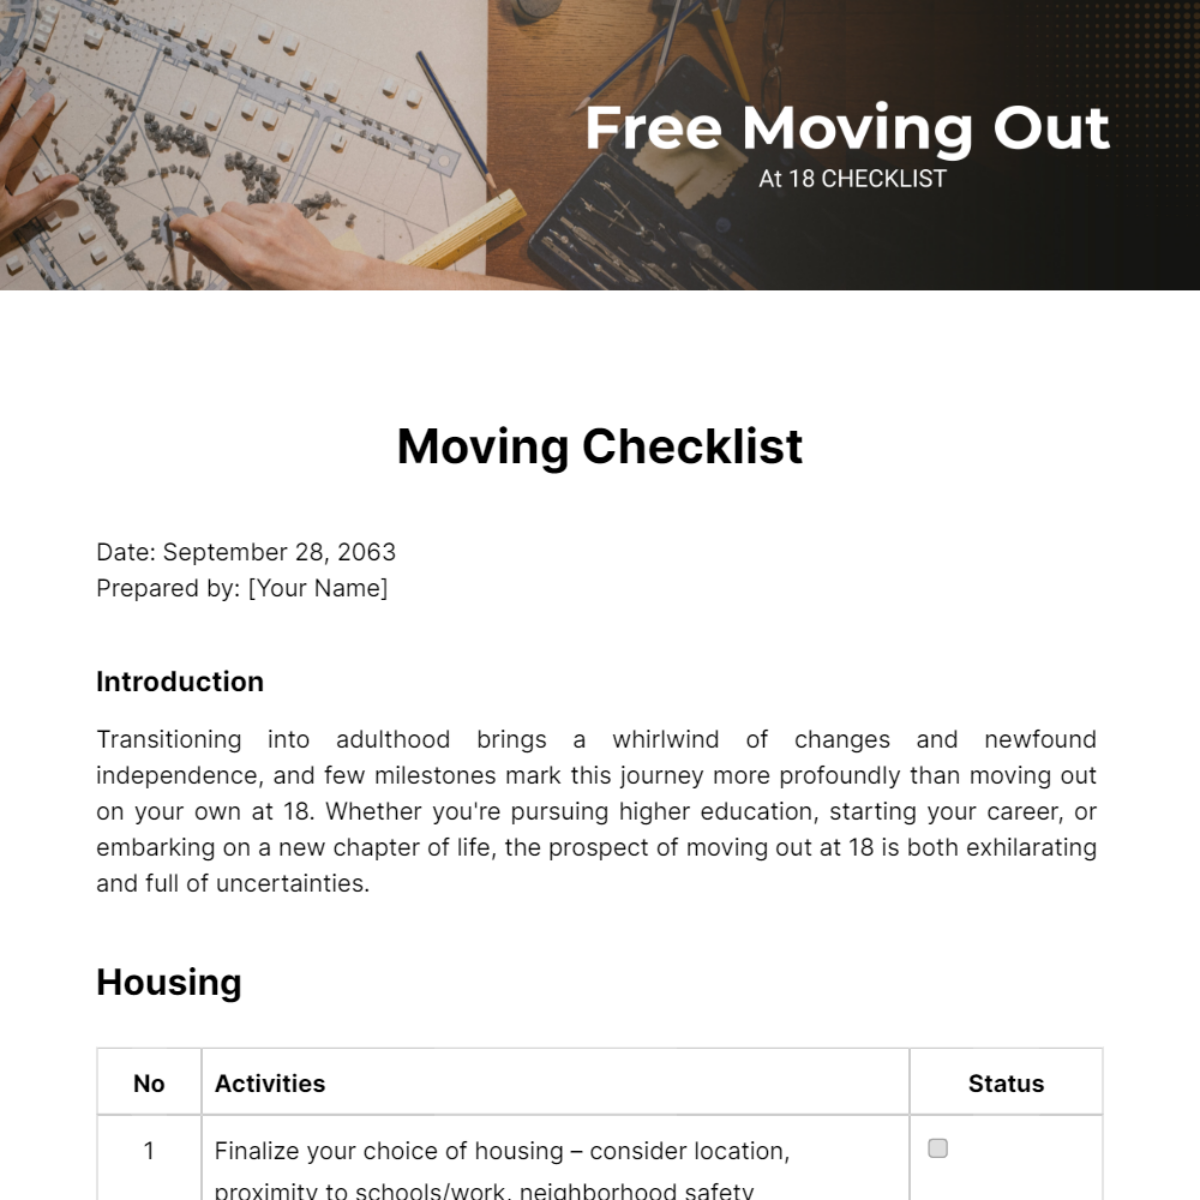 Moving Out at 18 Checklist Template